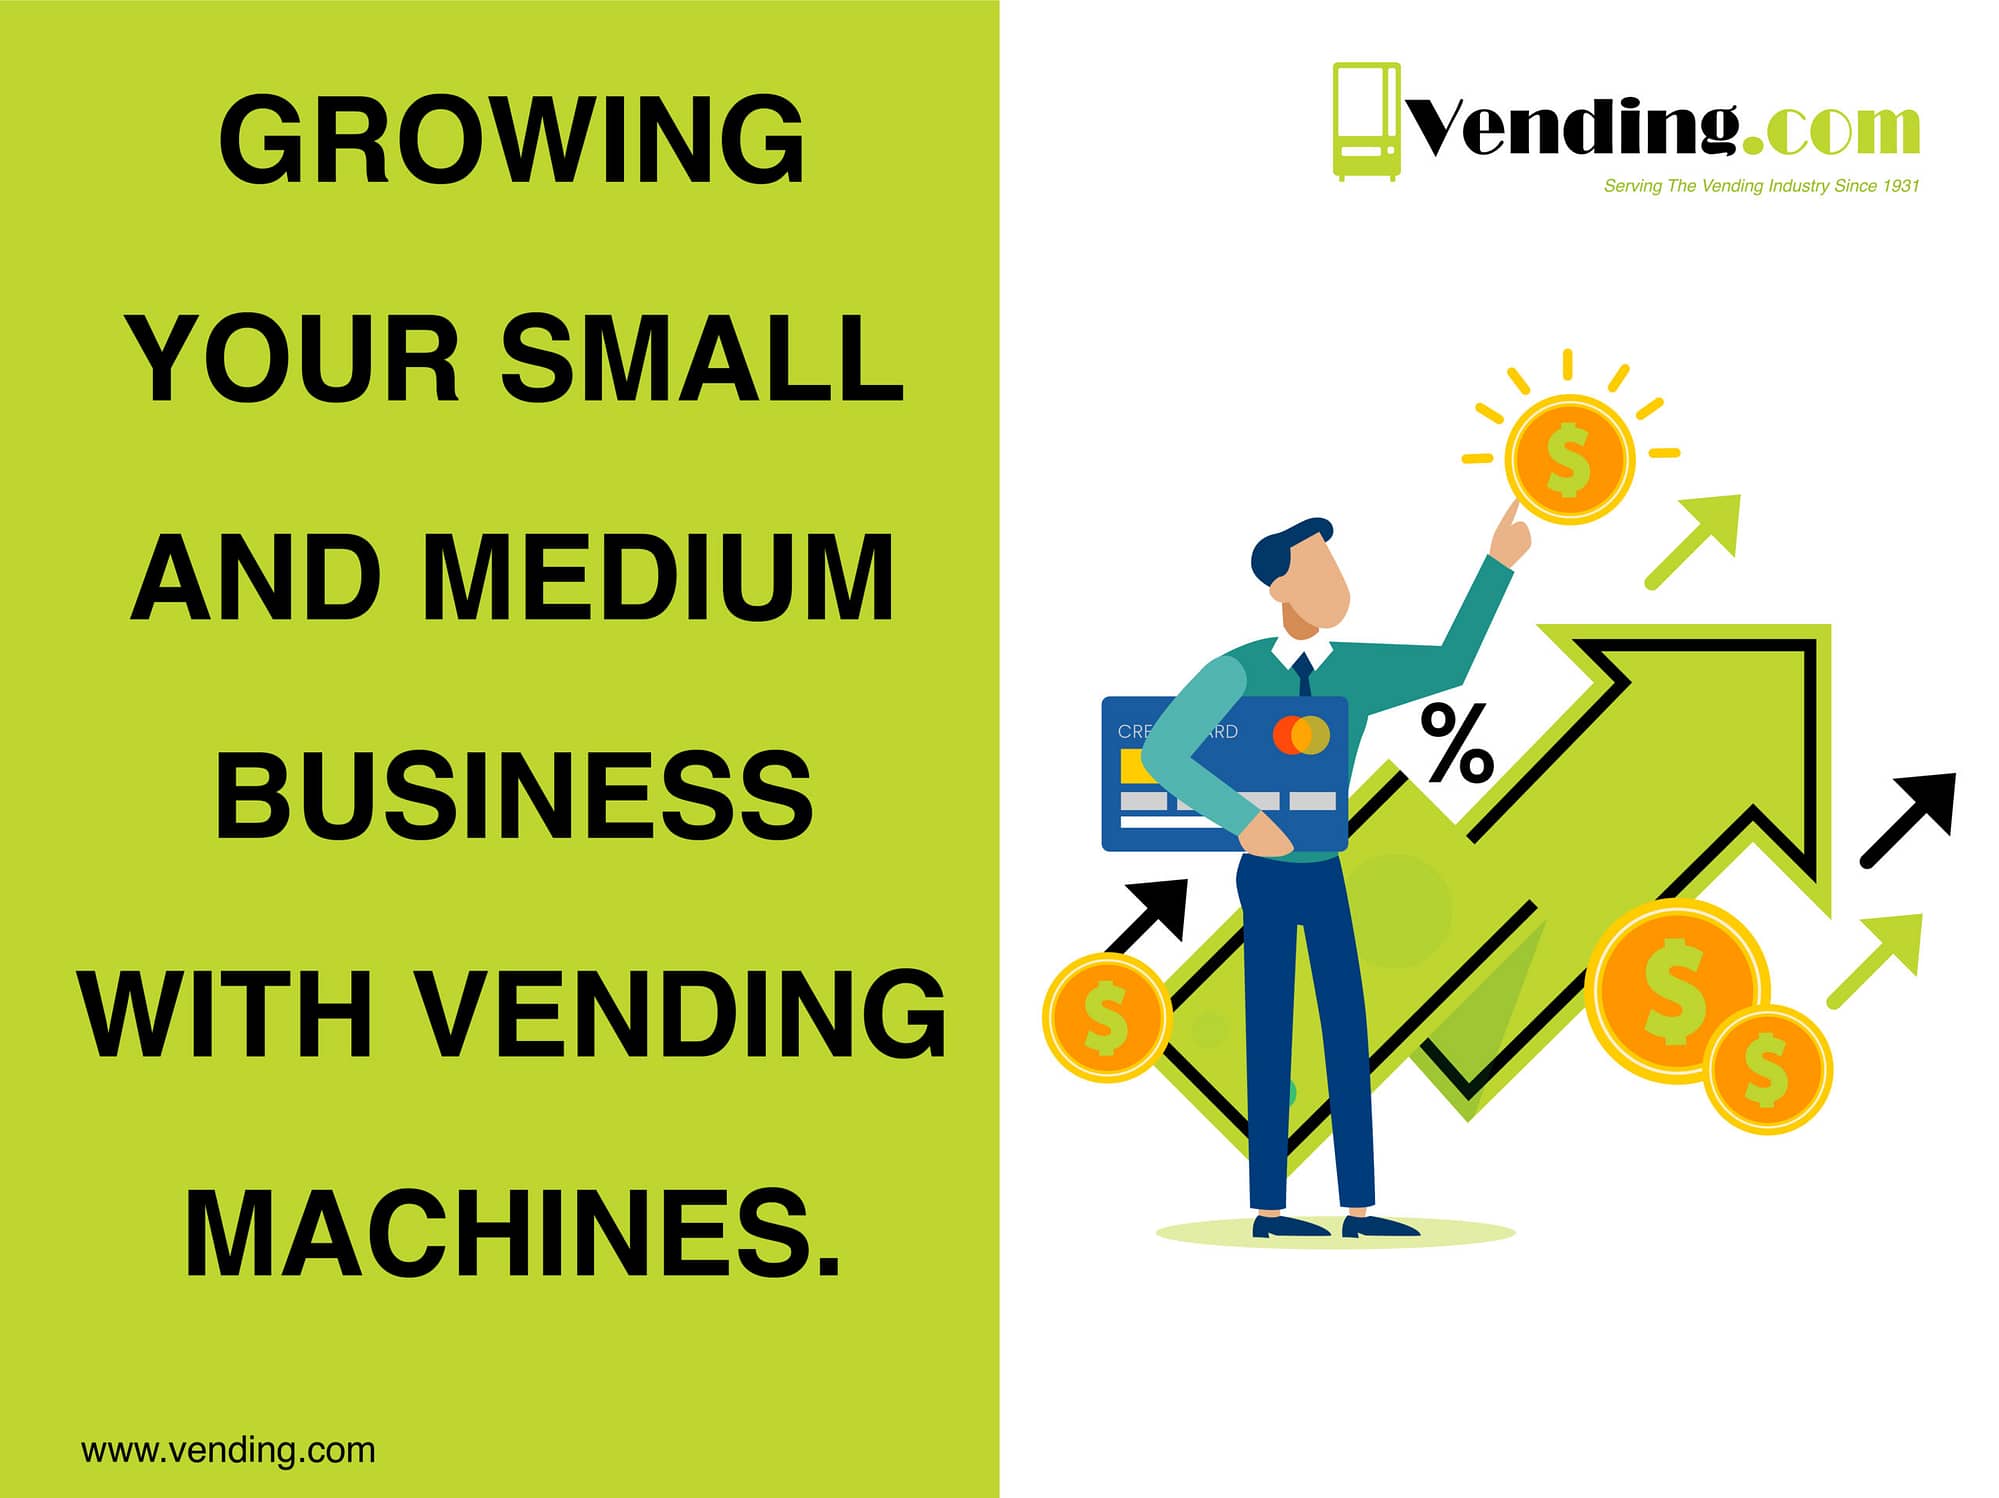 Vending.com - Growing Your Small and Medium Business With Vending Machines